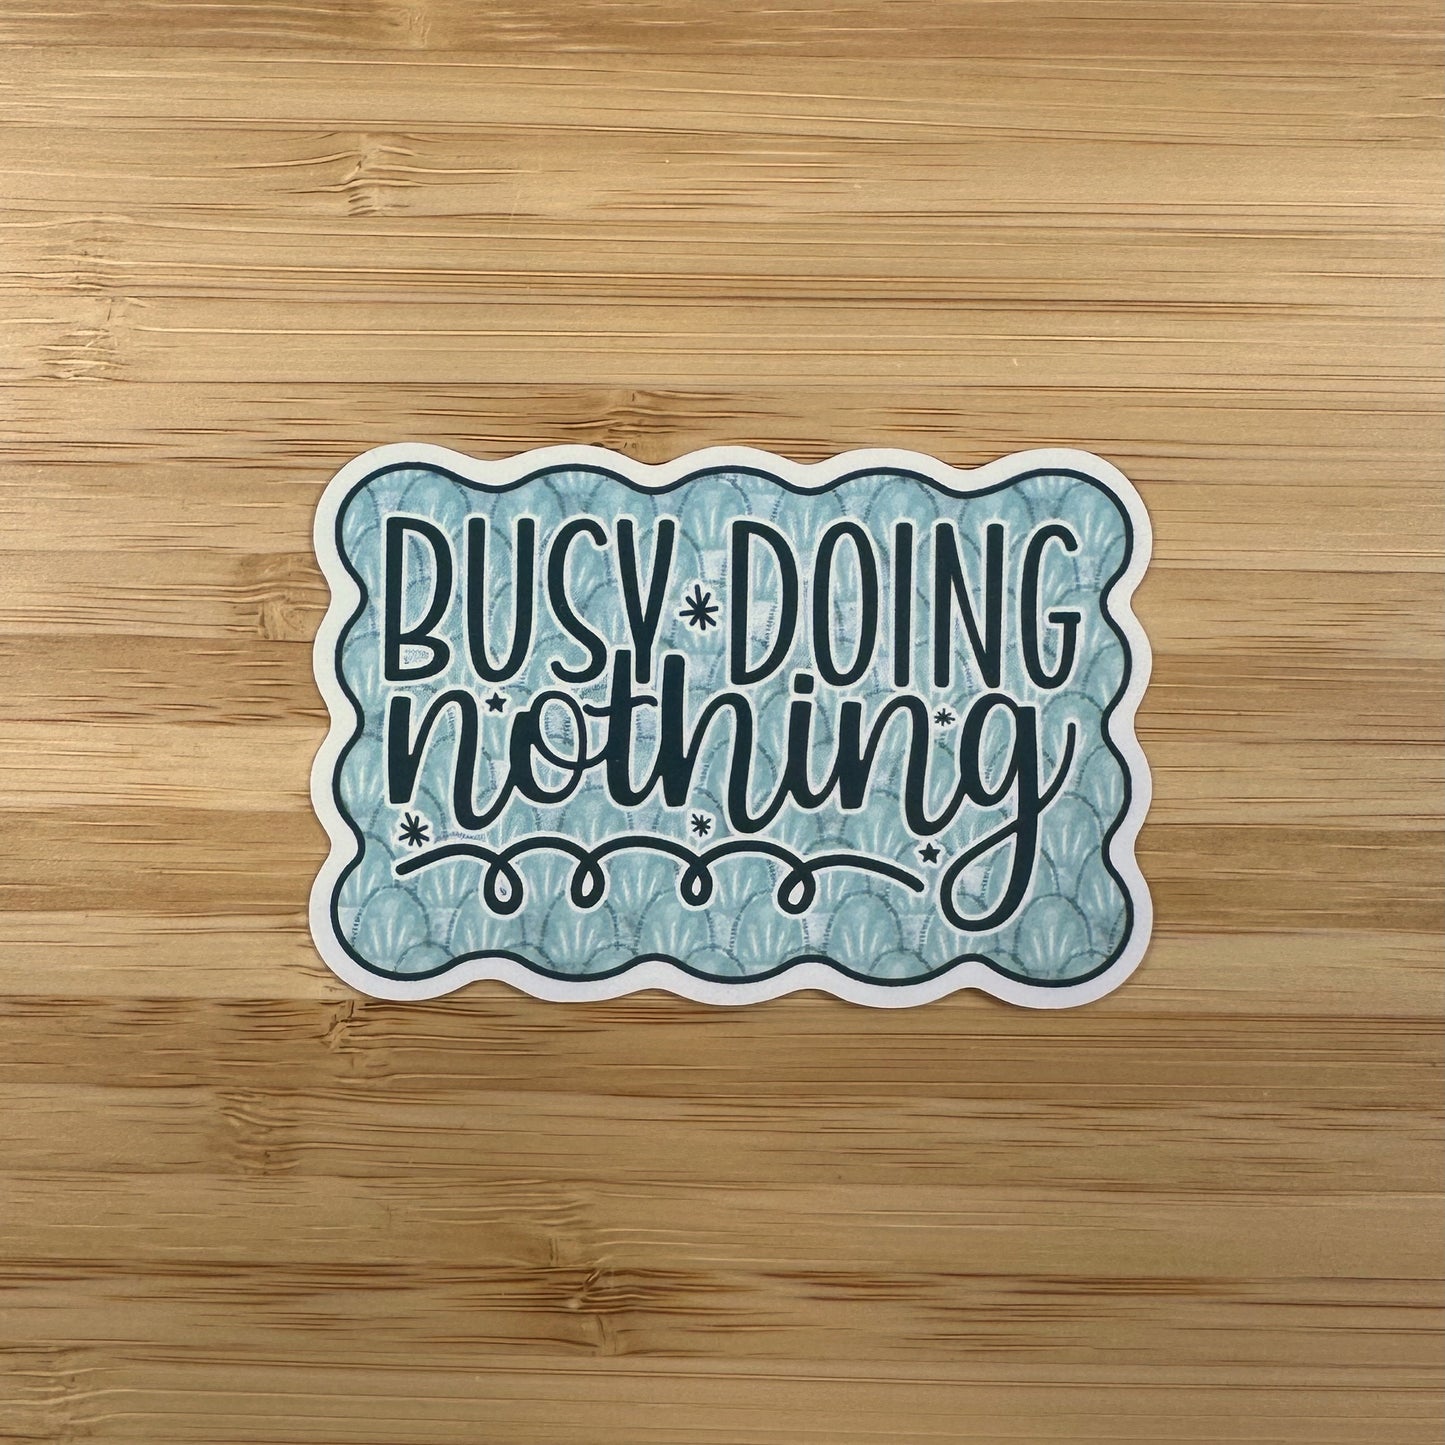 a sticker that says busy doing nothing on a wooden surface